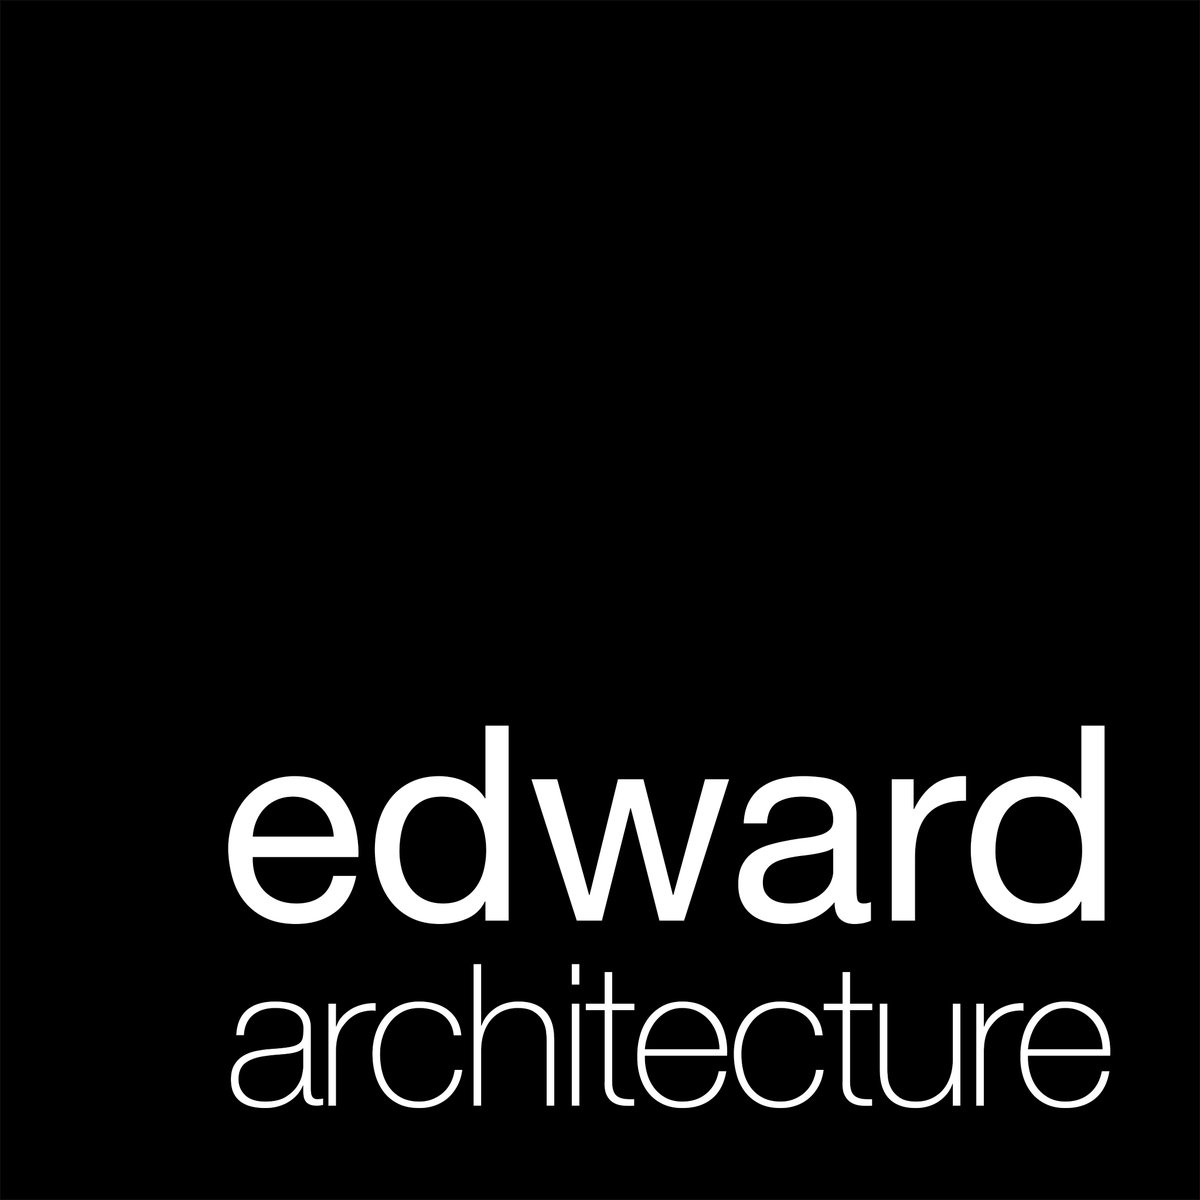 We are so pleased to have Edward Architecture supporting us once again. A loyal sponsor who will be presenting an Award to one of the winners on the evening. If you are interested in becoming a sponsor please visit yorkshirechildrenofcourage.com #charity #charityfundraising @EdwardArch